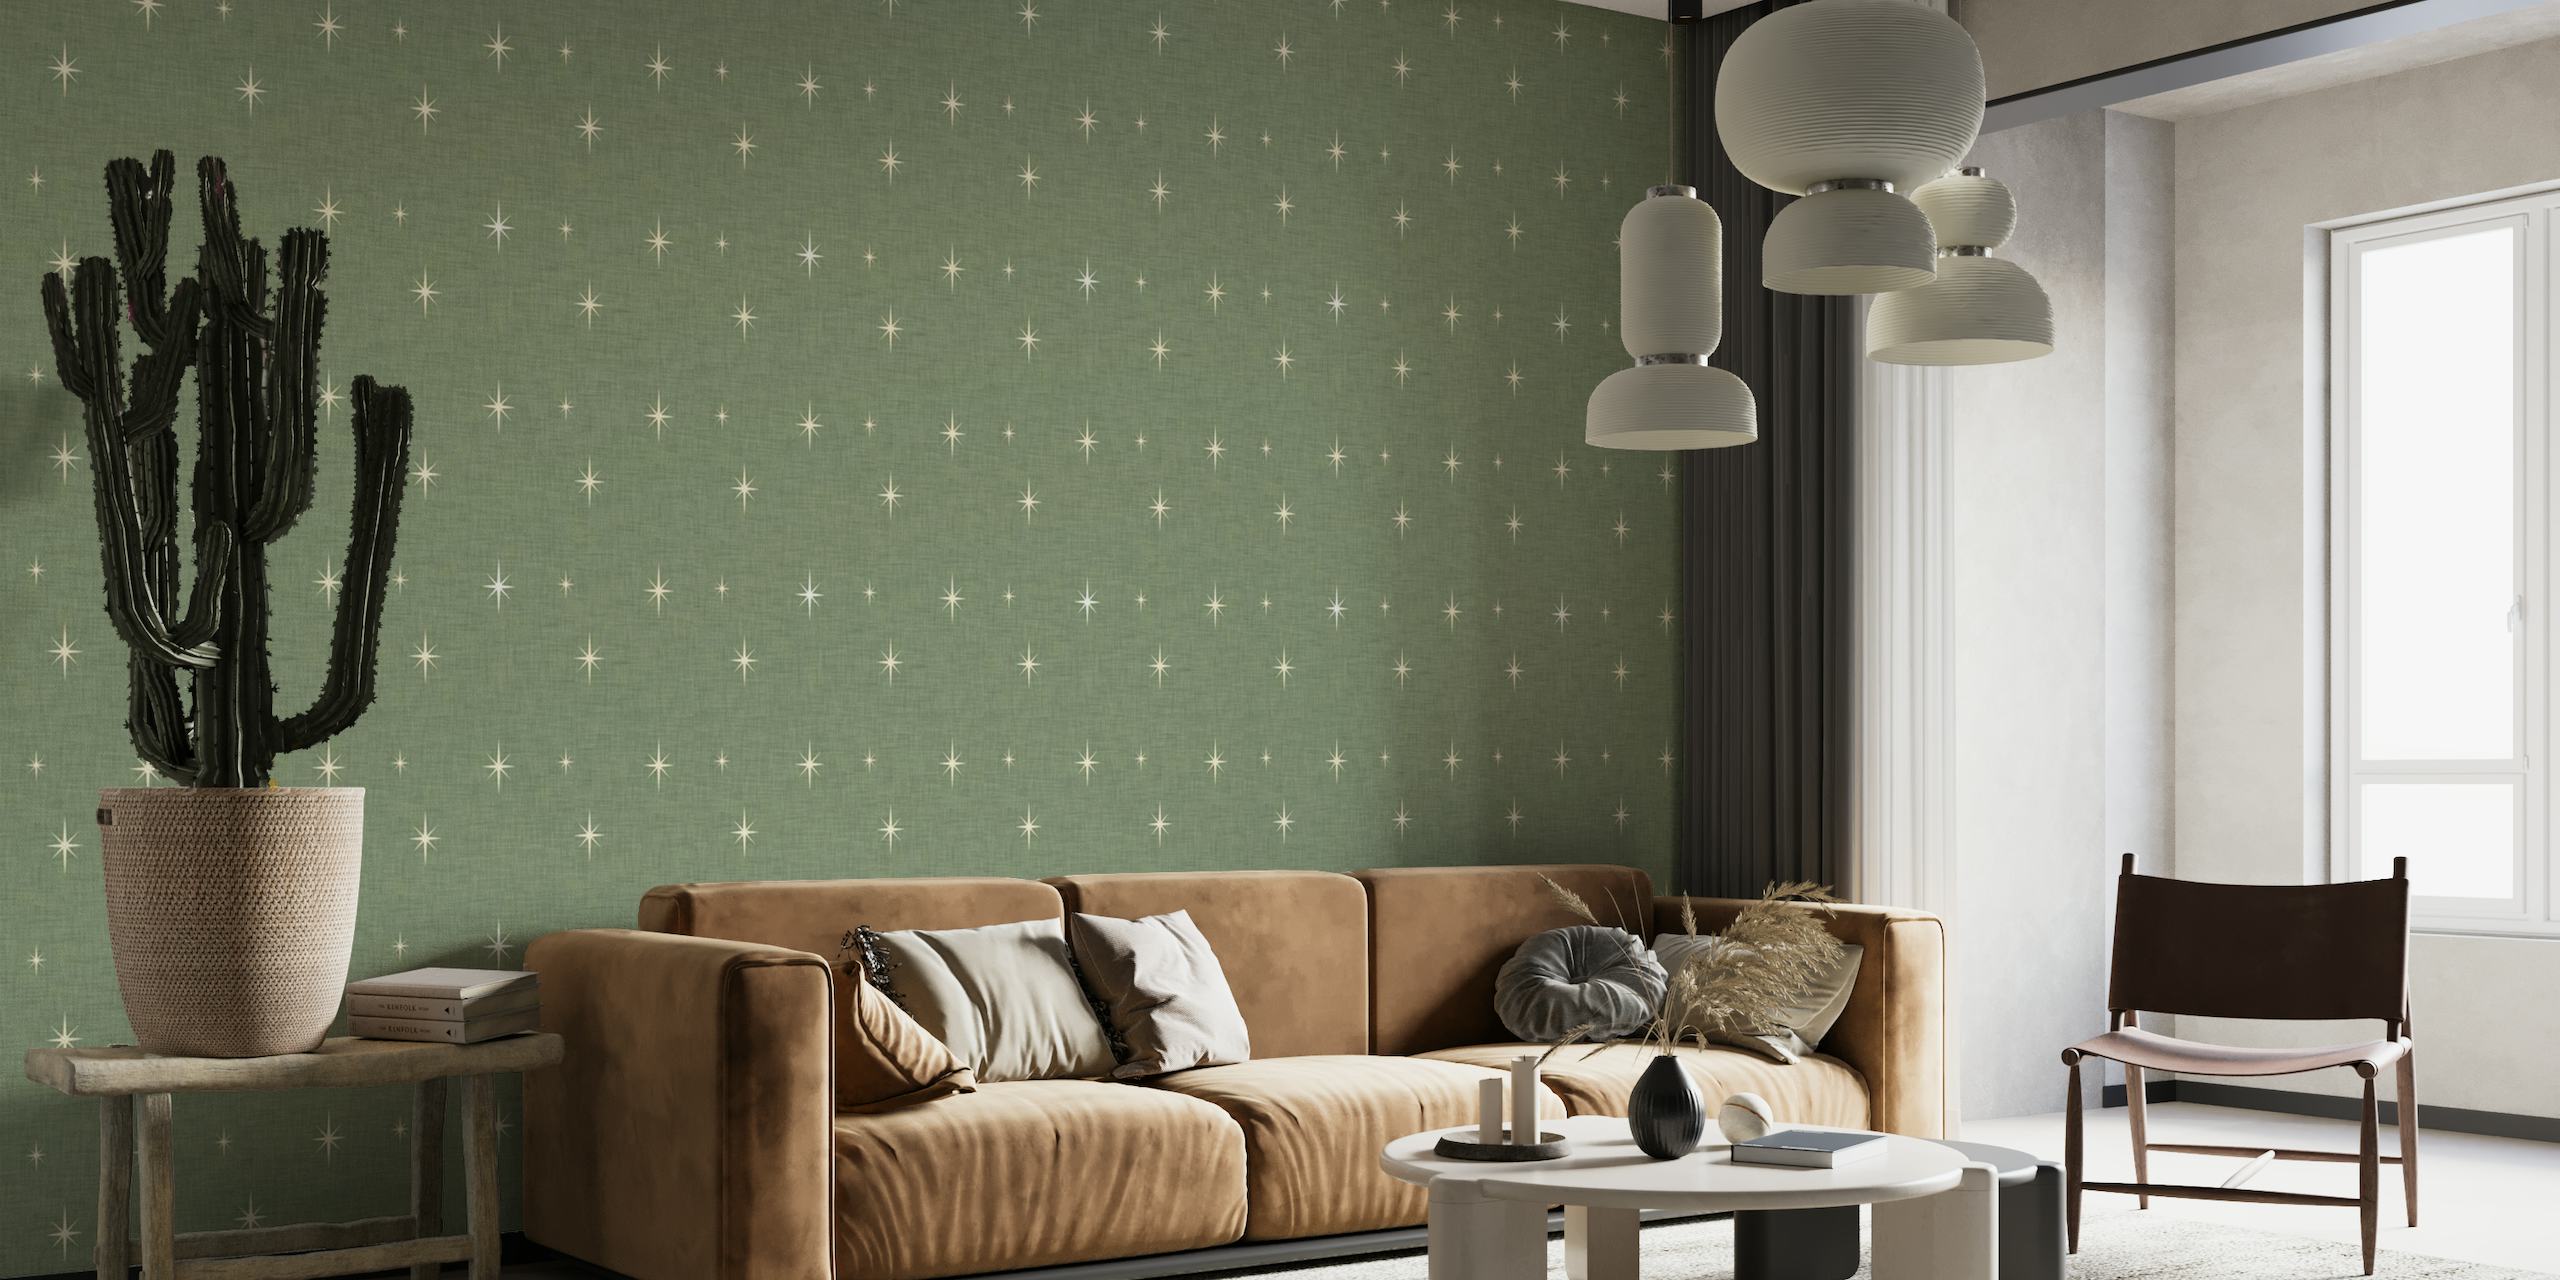 Mid Century Starburst pattern on a dark sage background for a wall mural